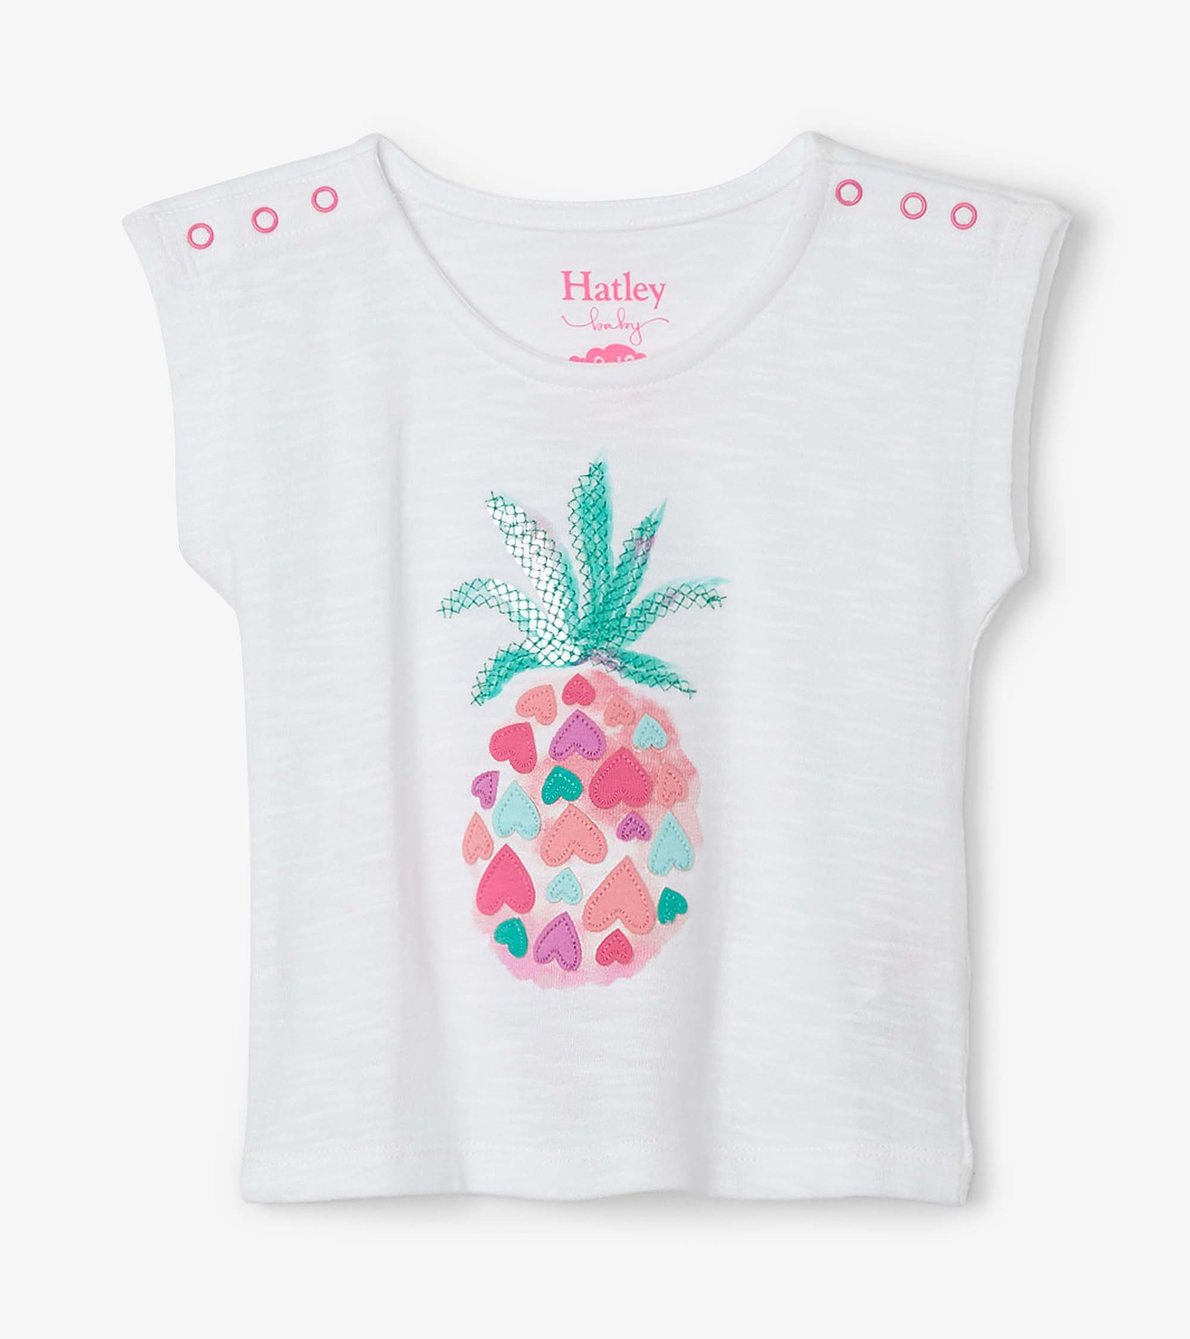 View larger image of Pineapple Hearts Baby Tee